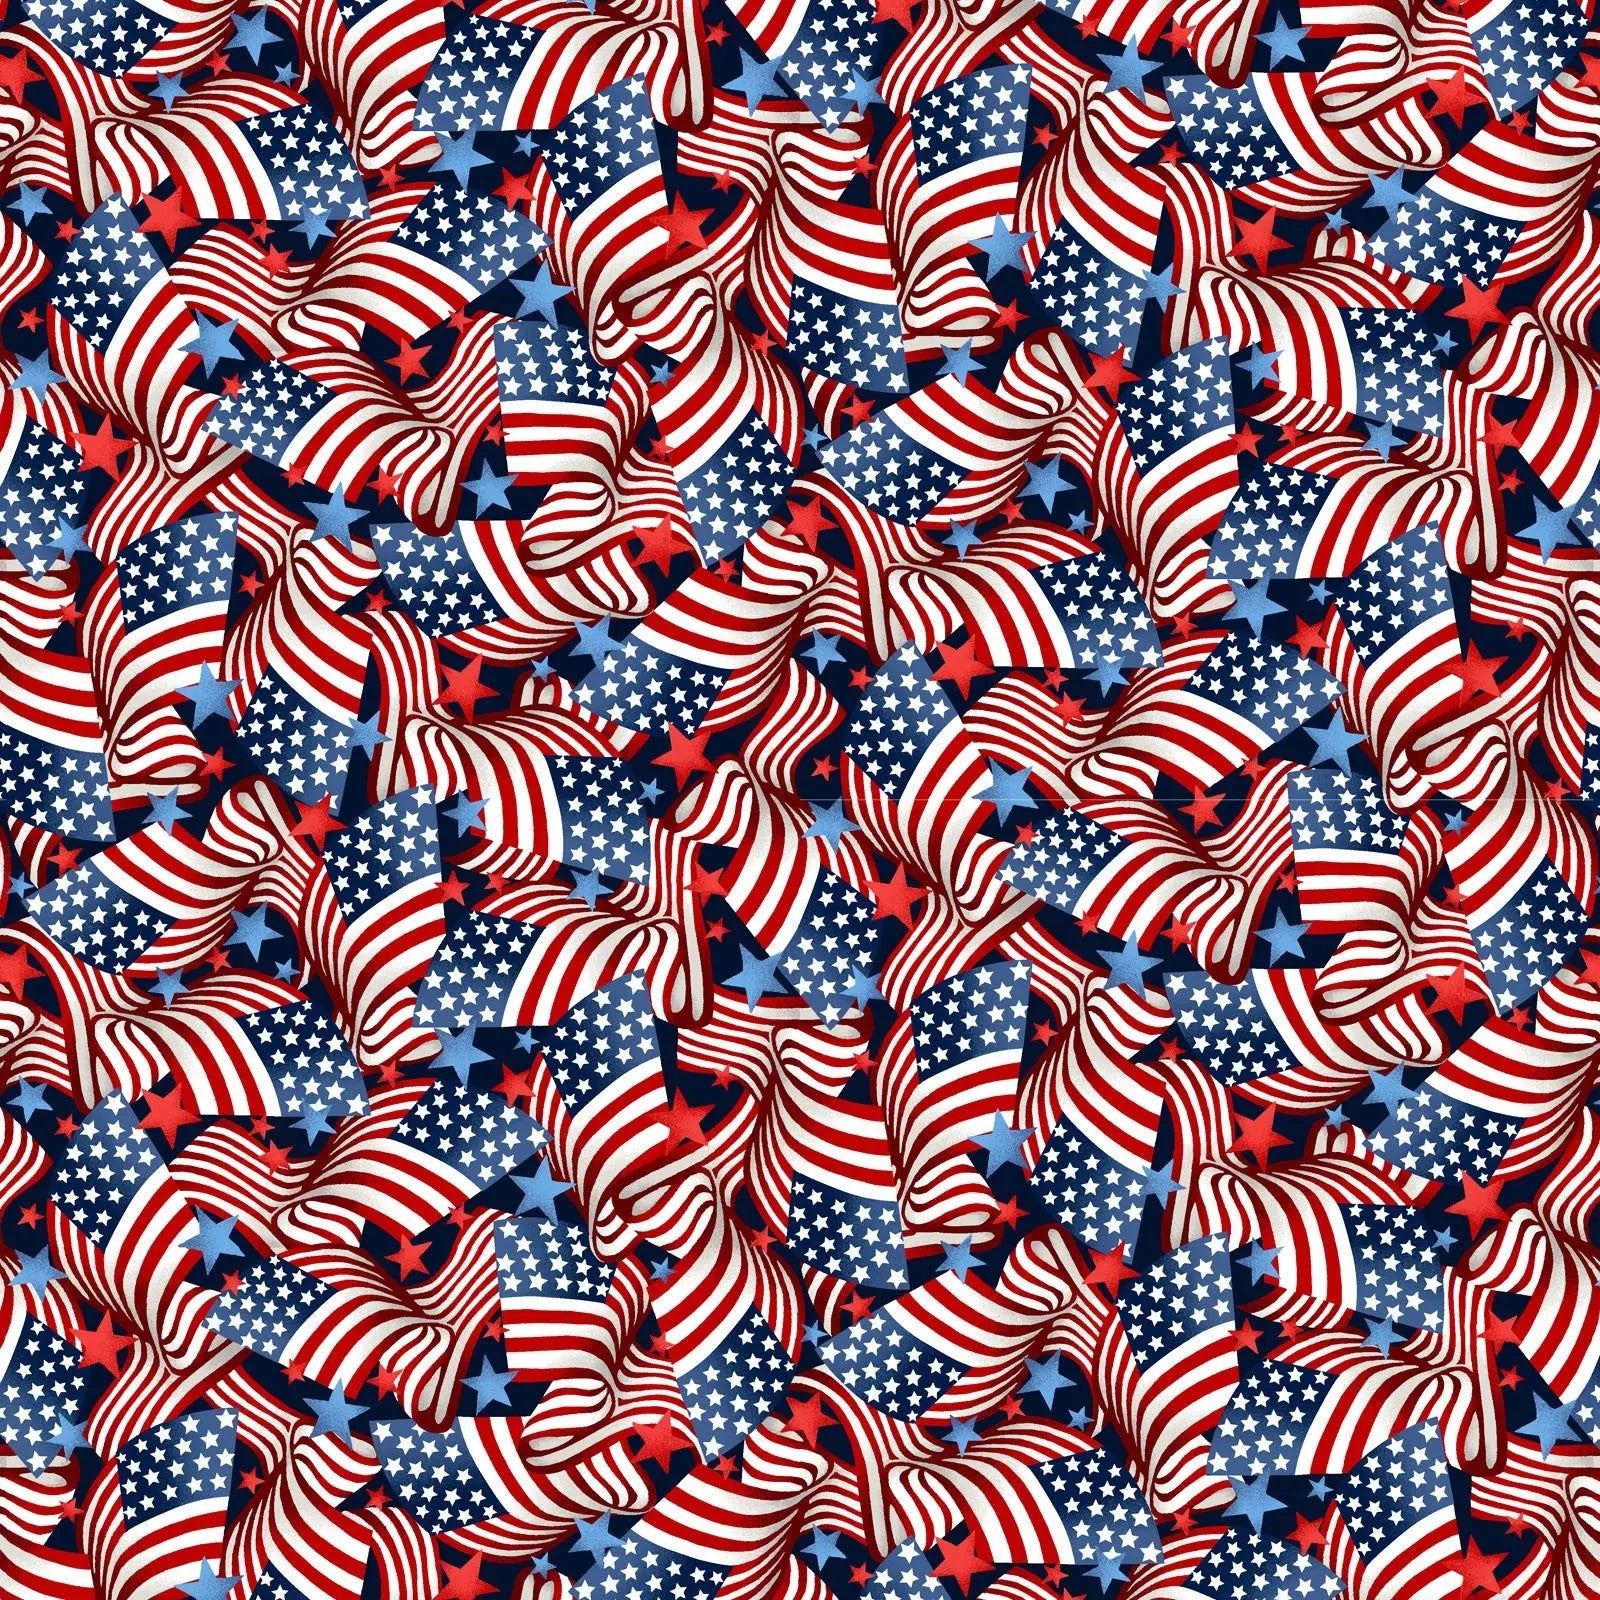 Red White and Starry Blue Too Flags Cotton Wideback Fabric per yard